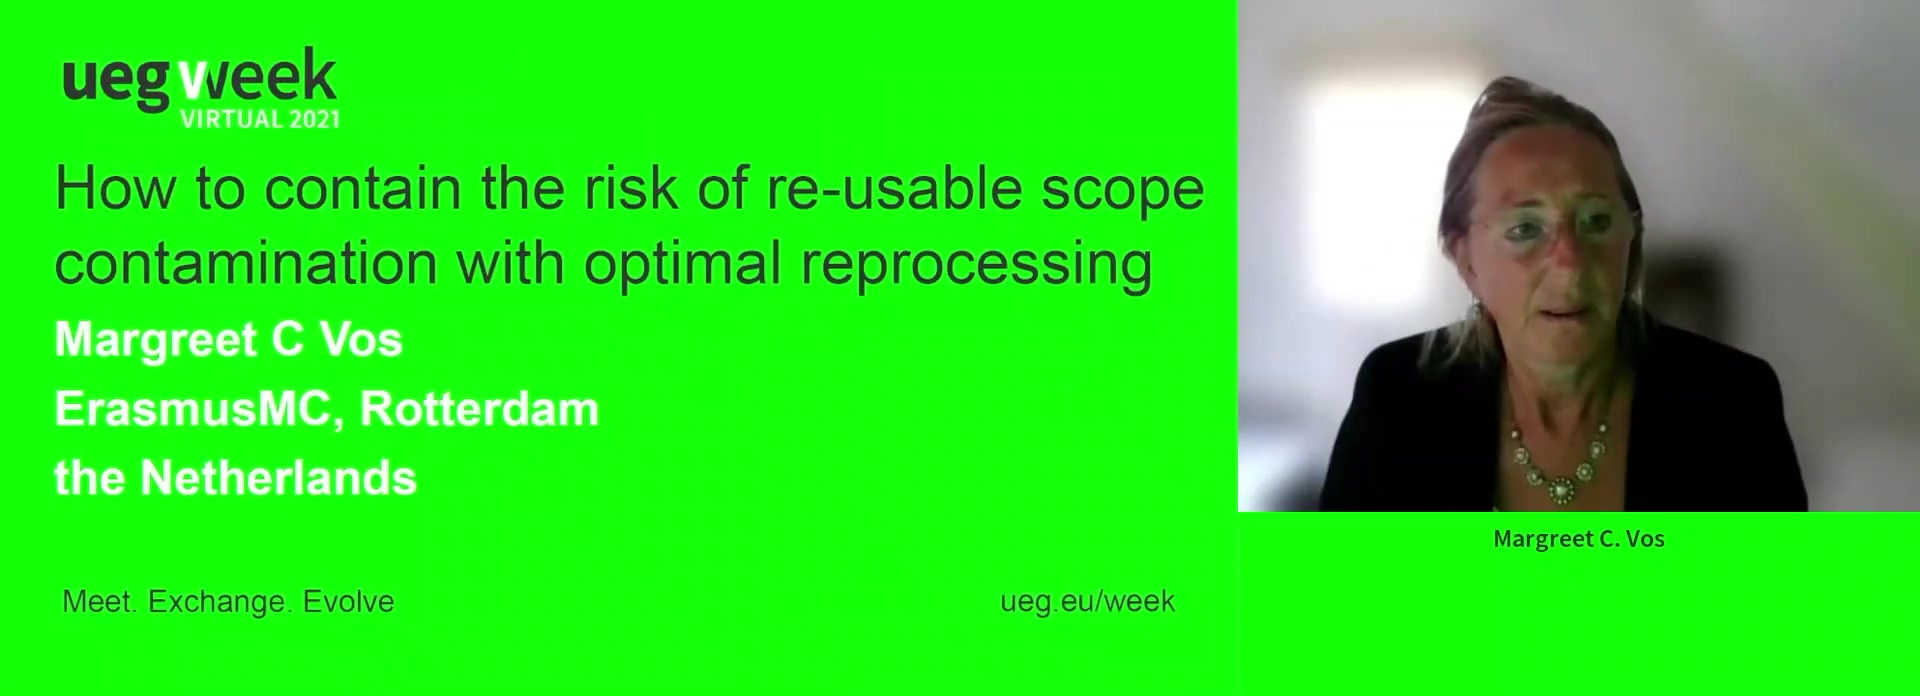 How to contain the risk of re-usable scope contamination with optimal reprocessing